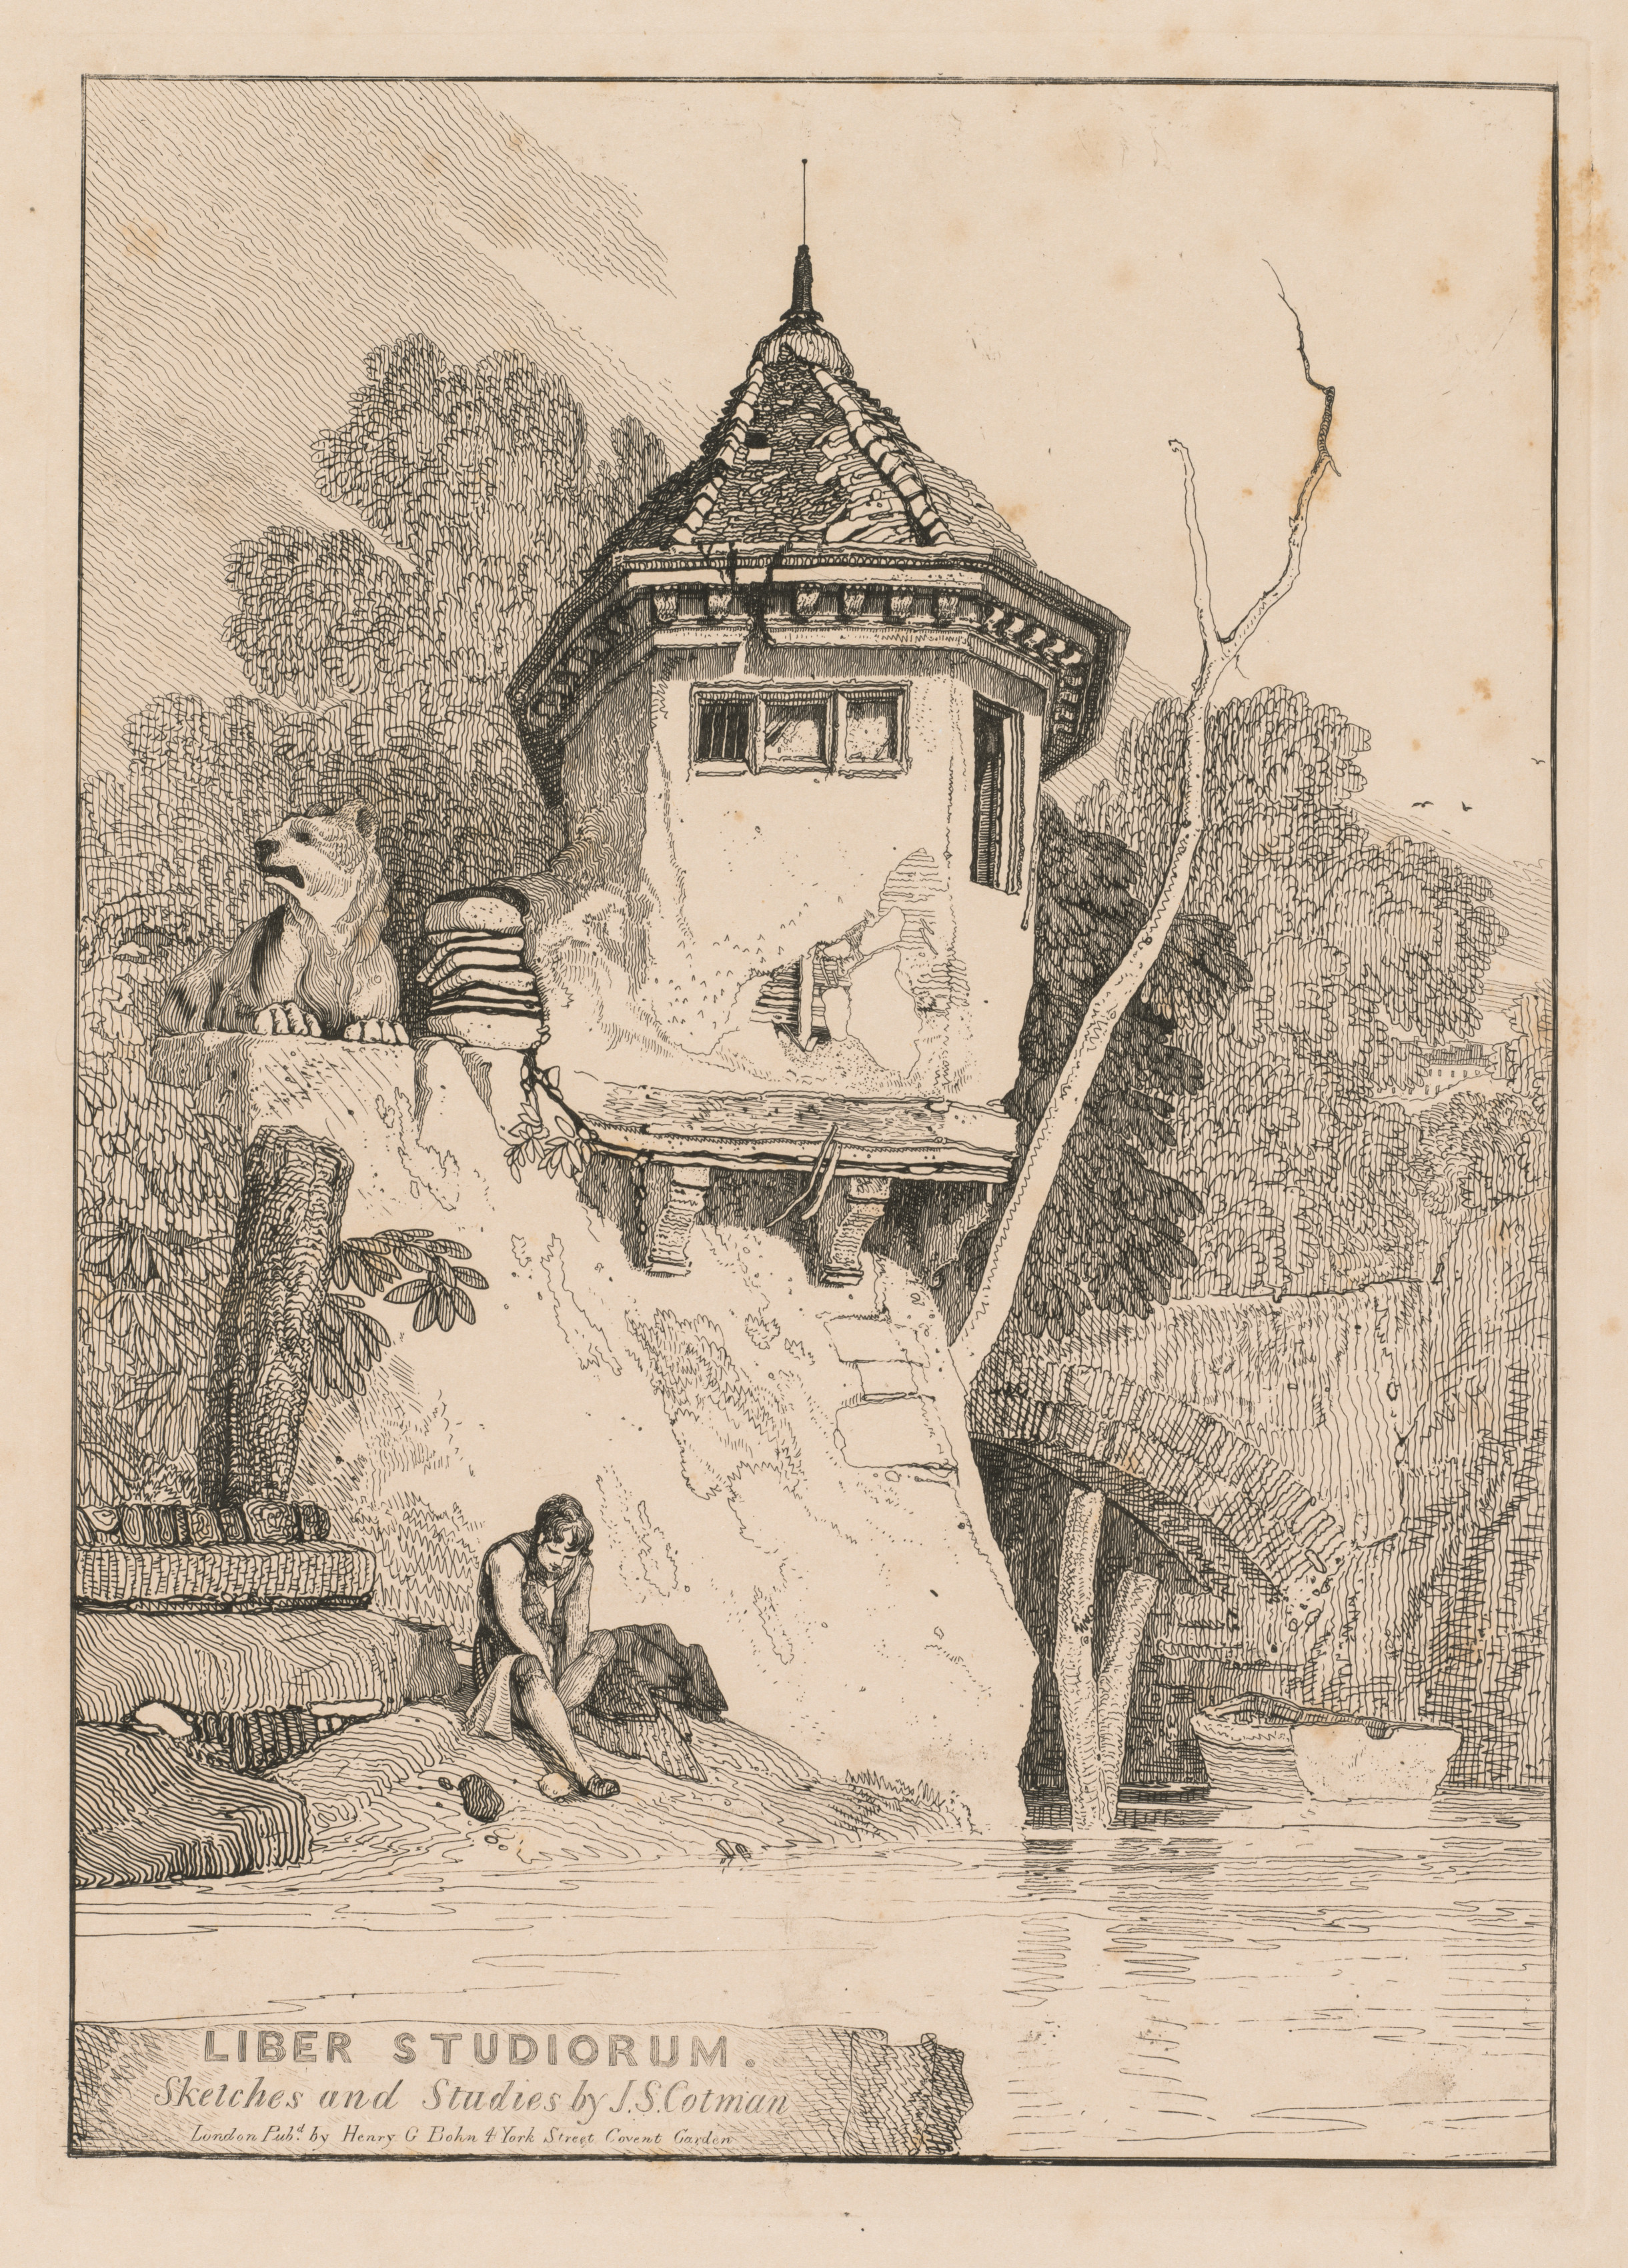 Liber Studiorum; Frontispiece, View of a Garden House on the Banks of the River Yare